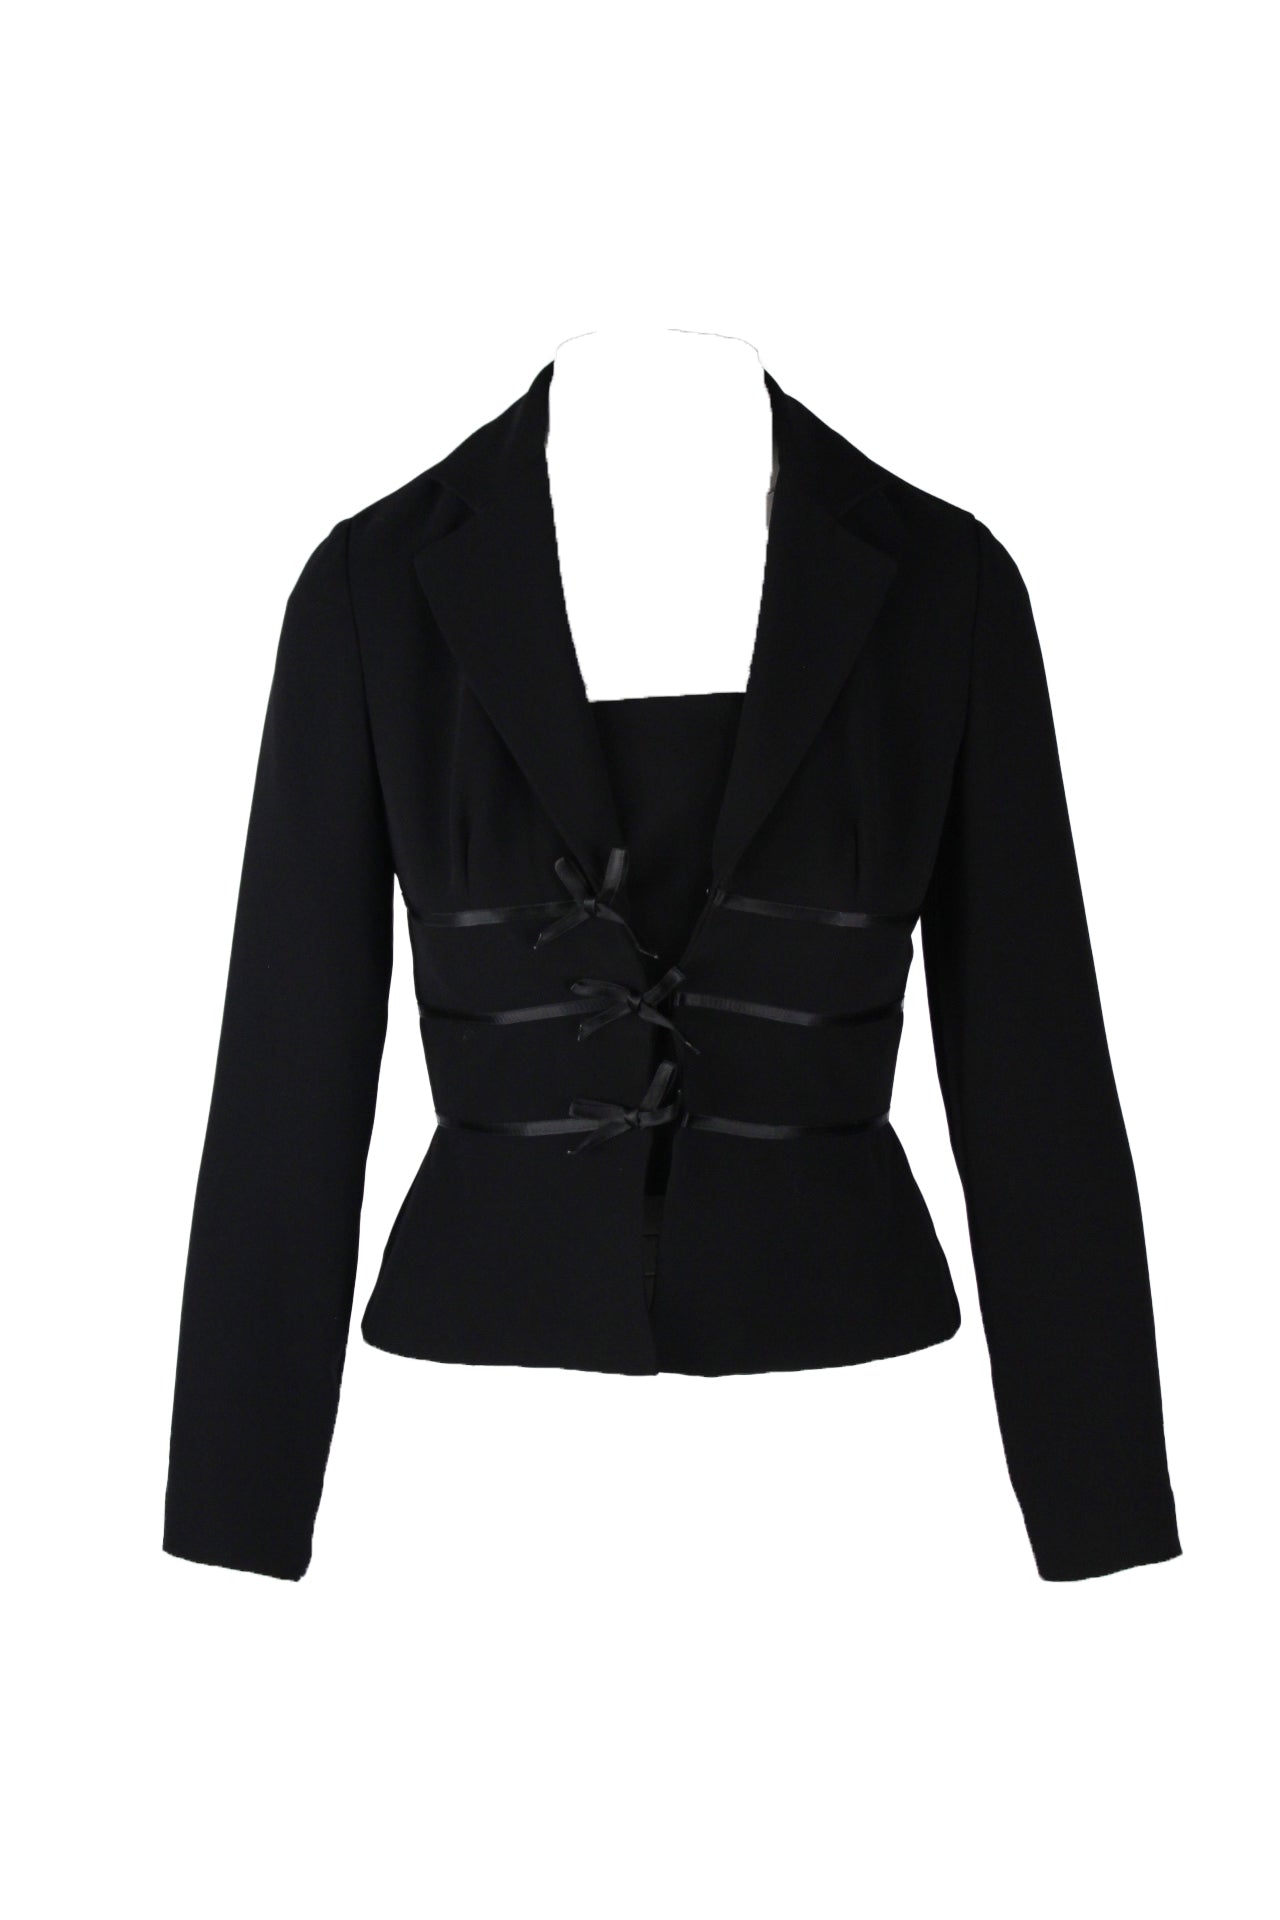 description: vintage evan-picone black long sleeve short blazer. features v neckline with coverage fabric that can be hidden, lapel collar, three bows at front waist, fitted silhouette, and hook closure at center front. 